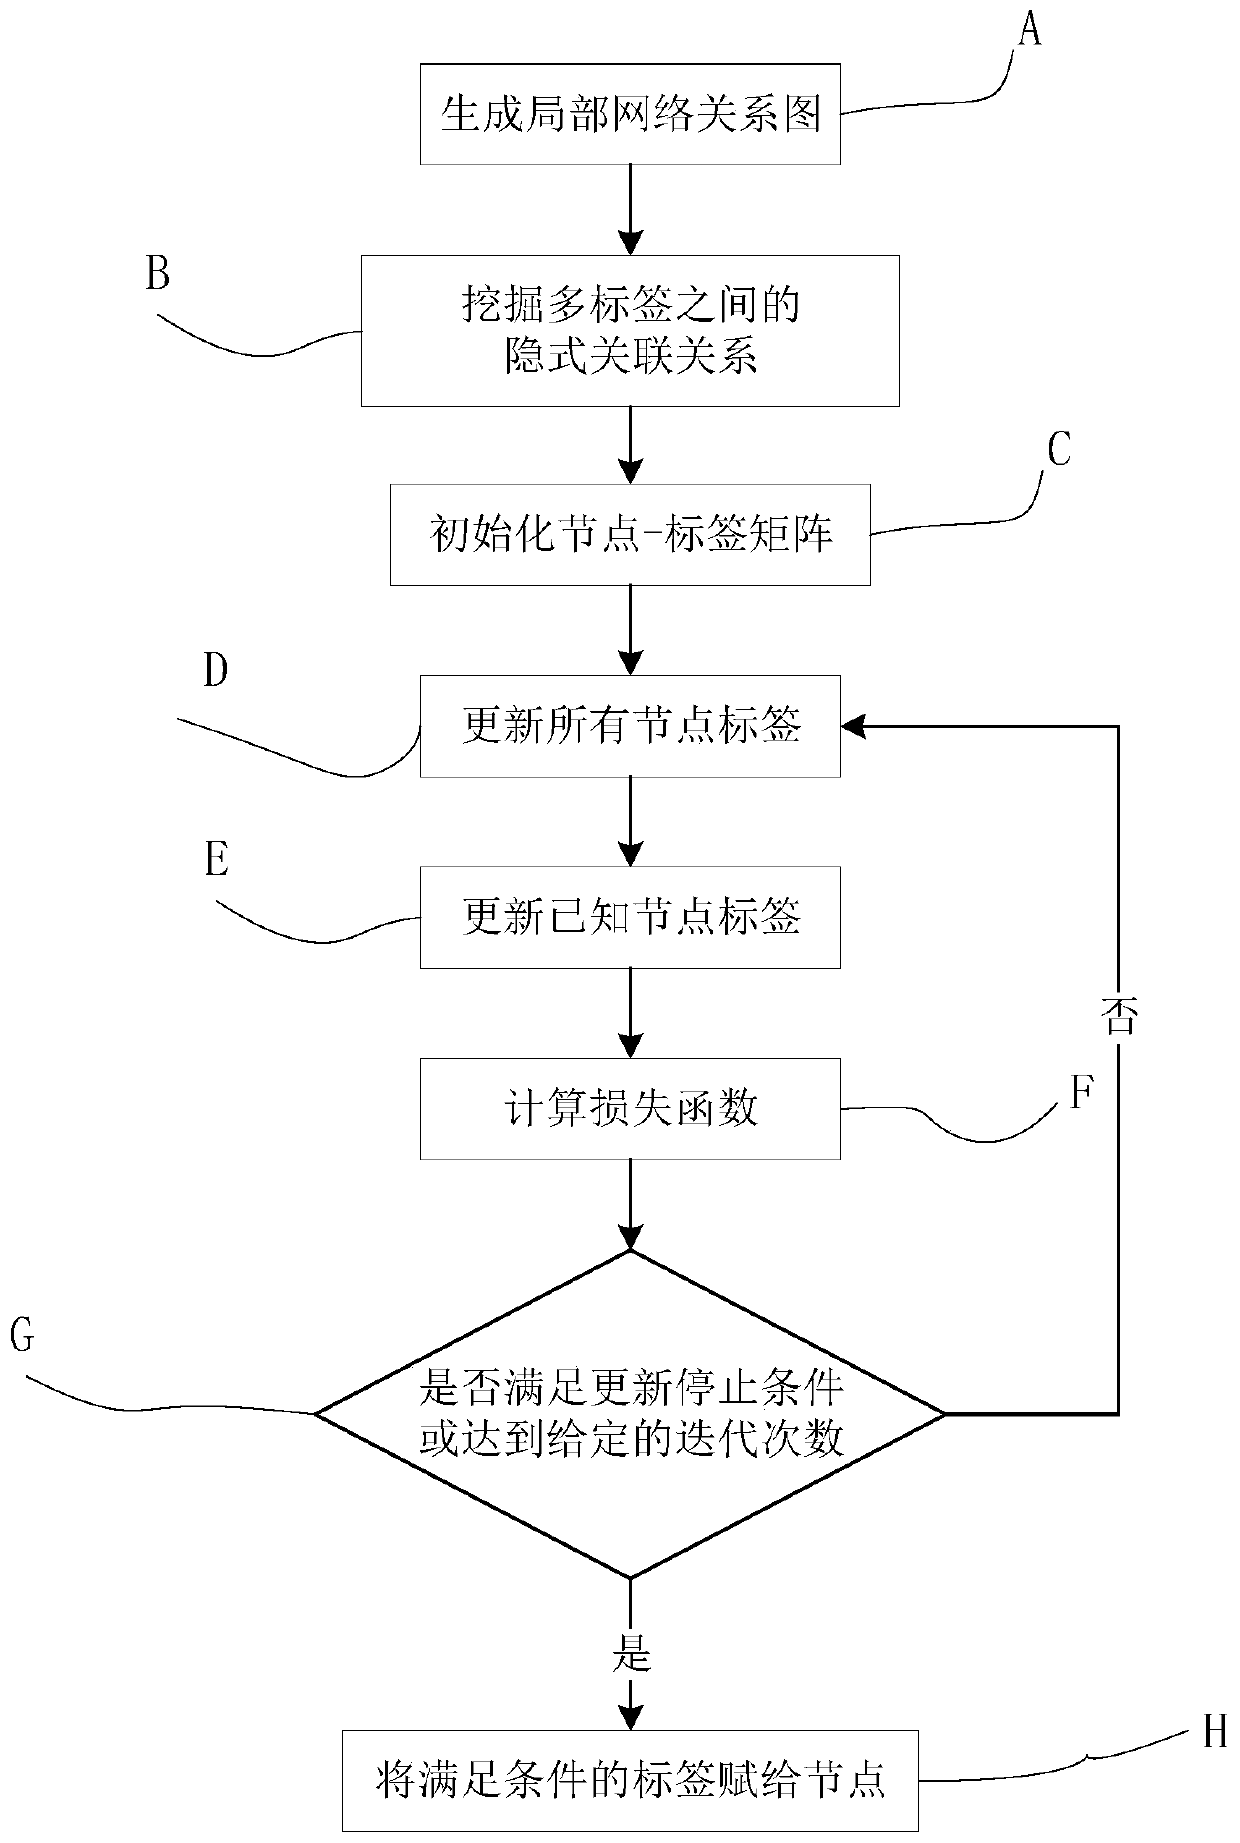 Multi-label propagation method and system based on implicit association